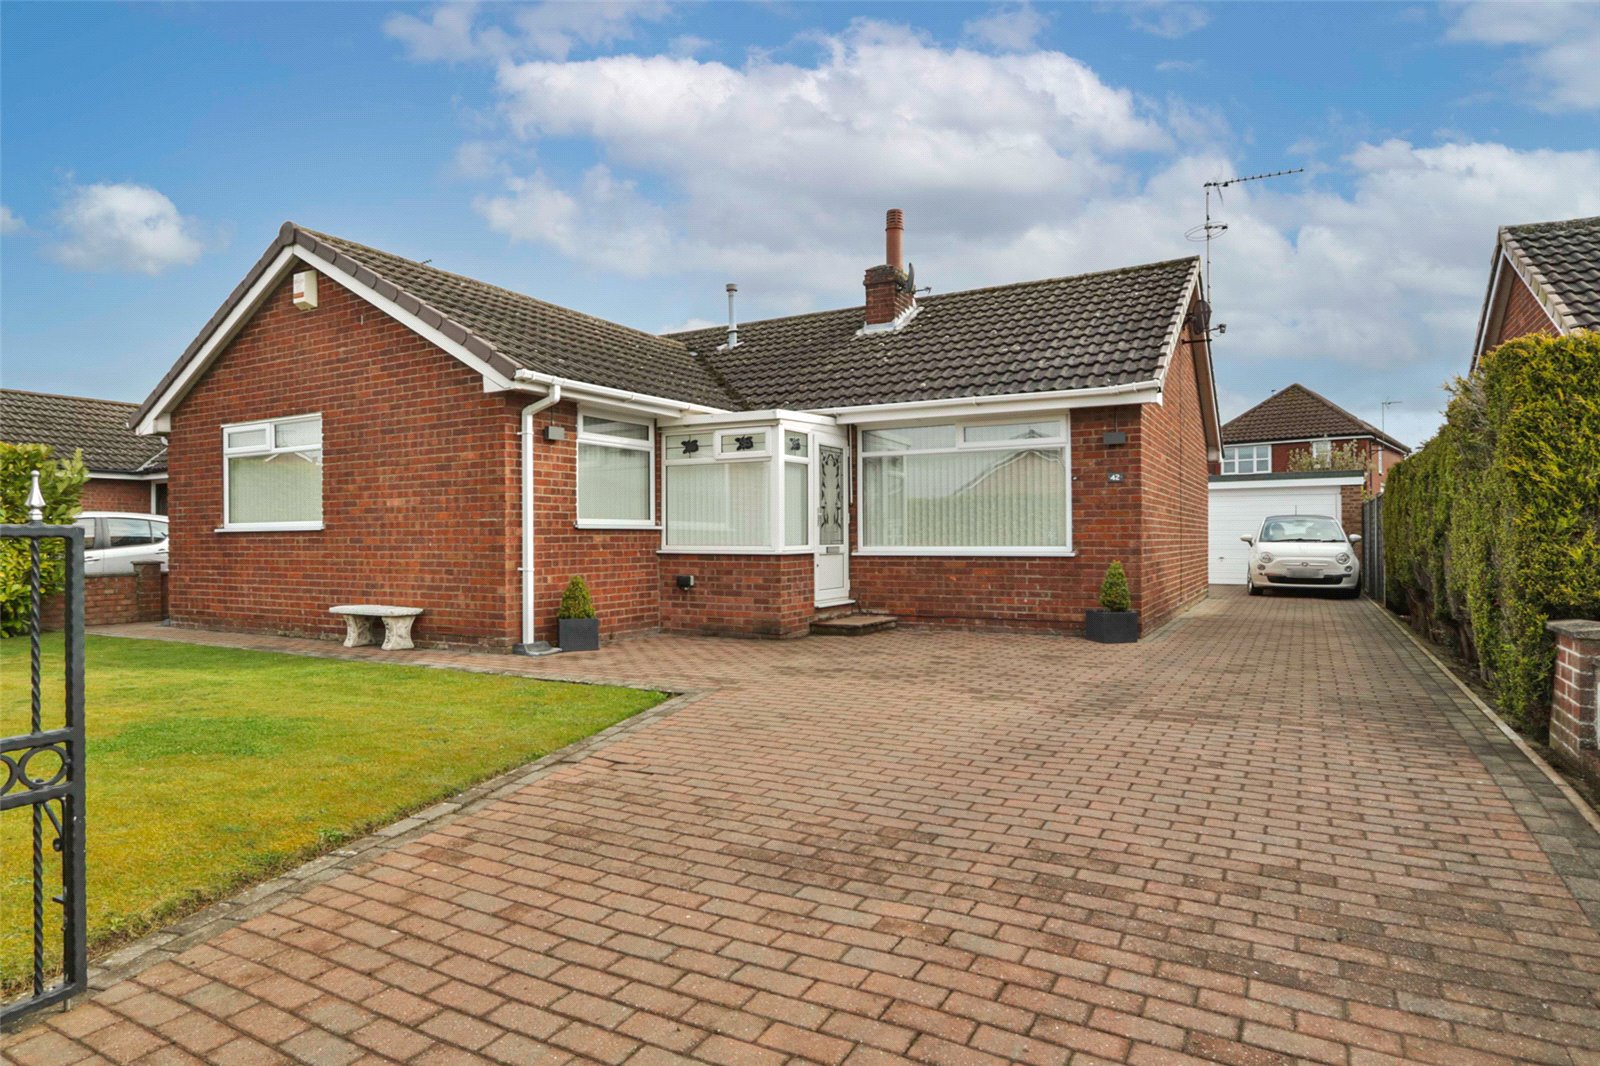 3 bed bungalow for sale in The Meadows, Leven, HU17